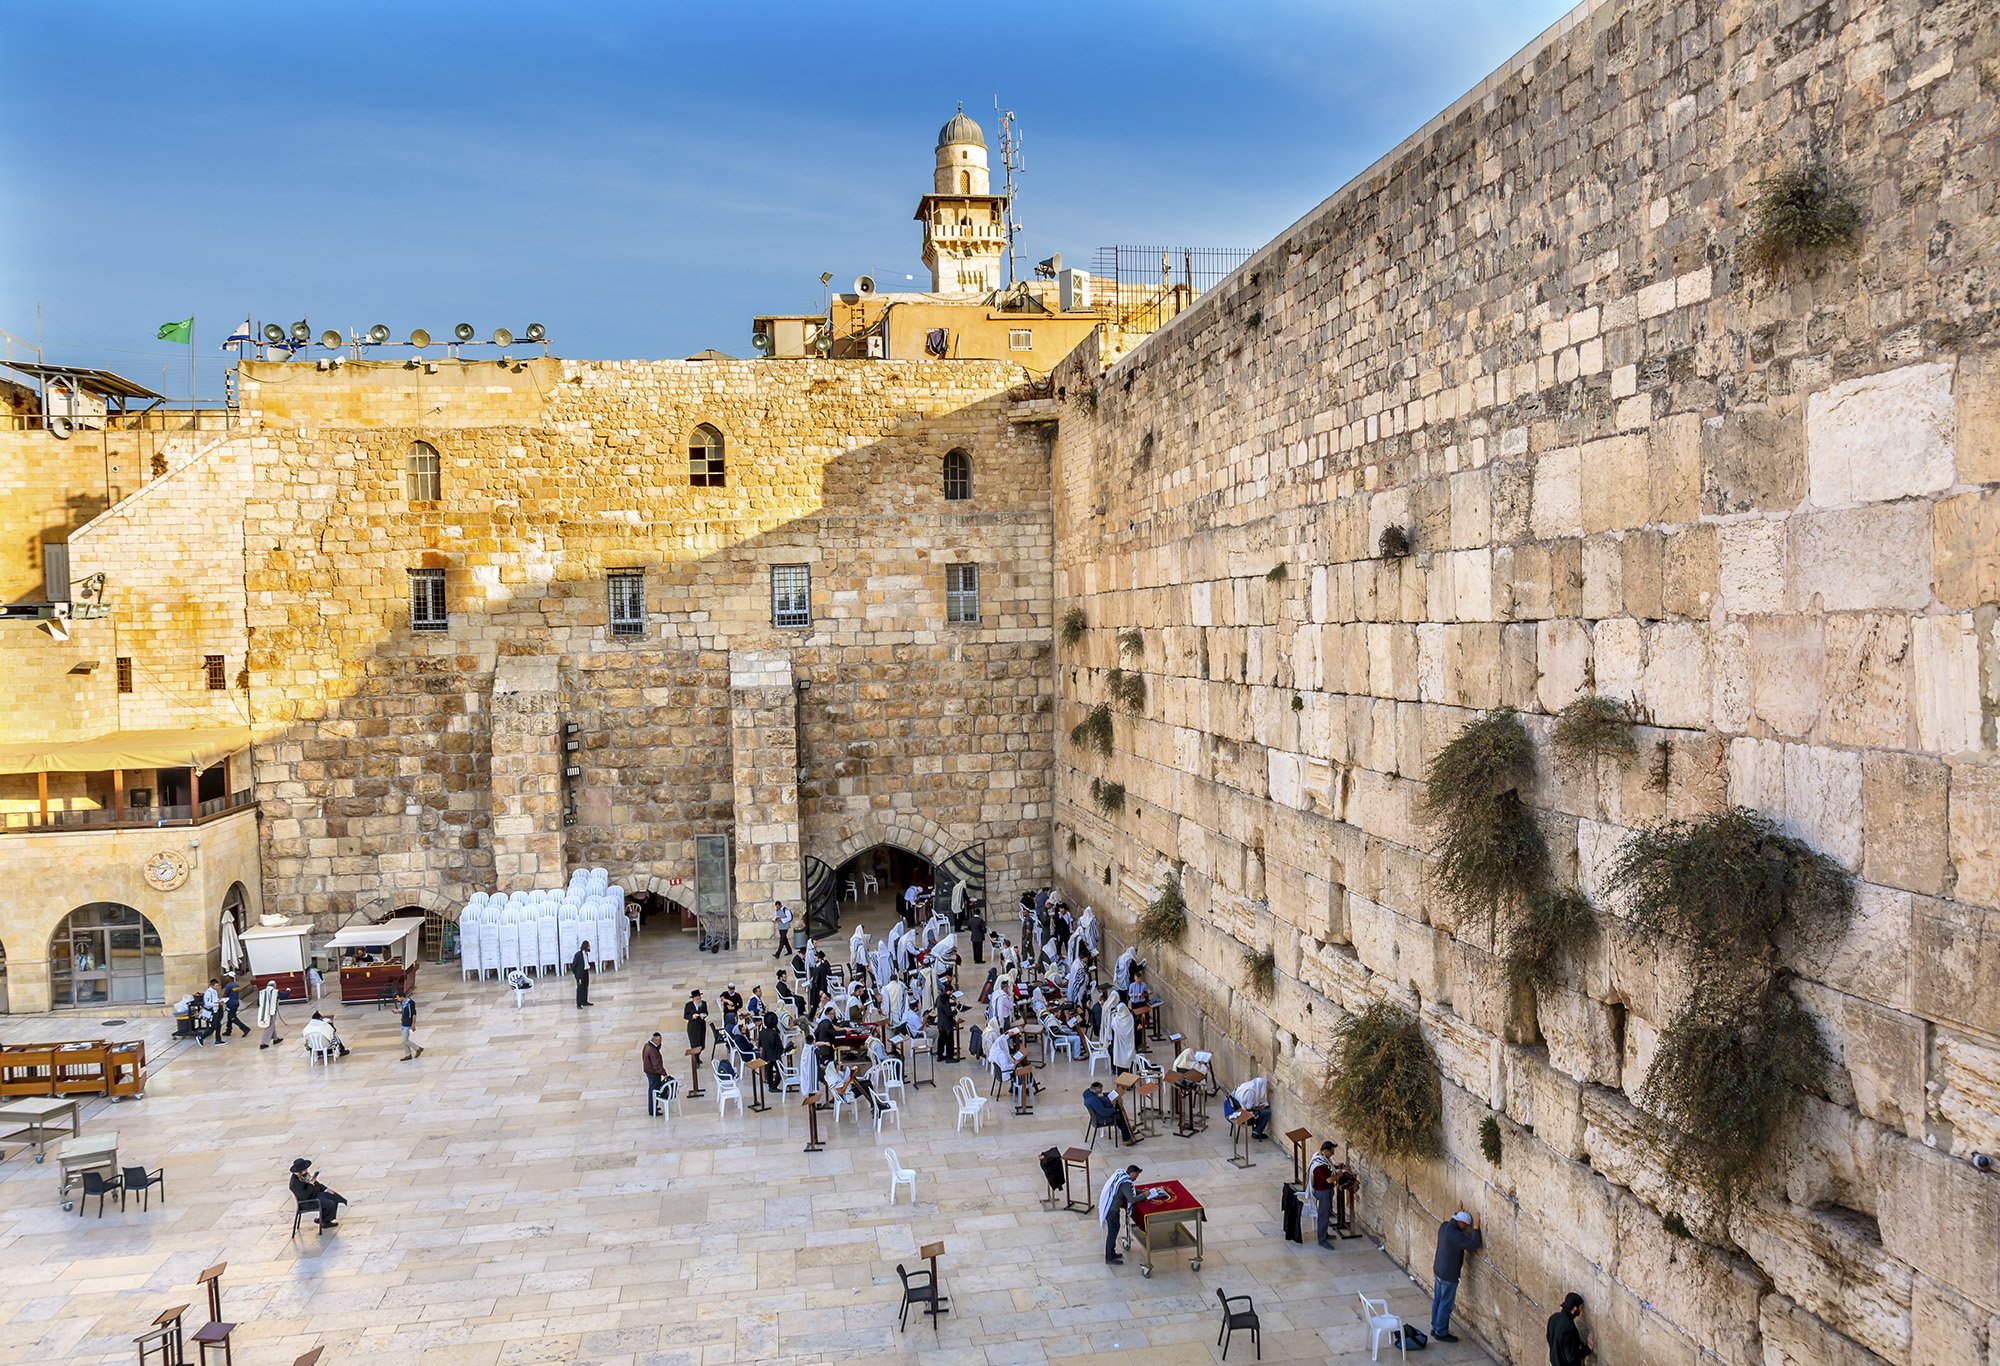 The Western Wall or Wailing Wall is usually just called the "Kotel" by Jews. It once belonged to the Herodian Temple, but only acquired religious significance later.